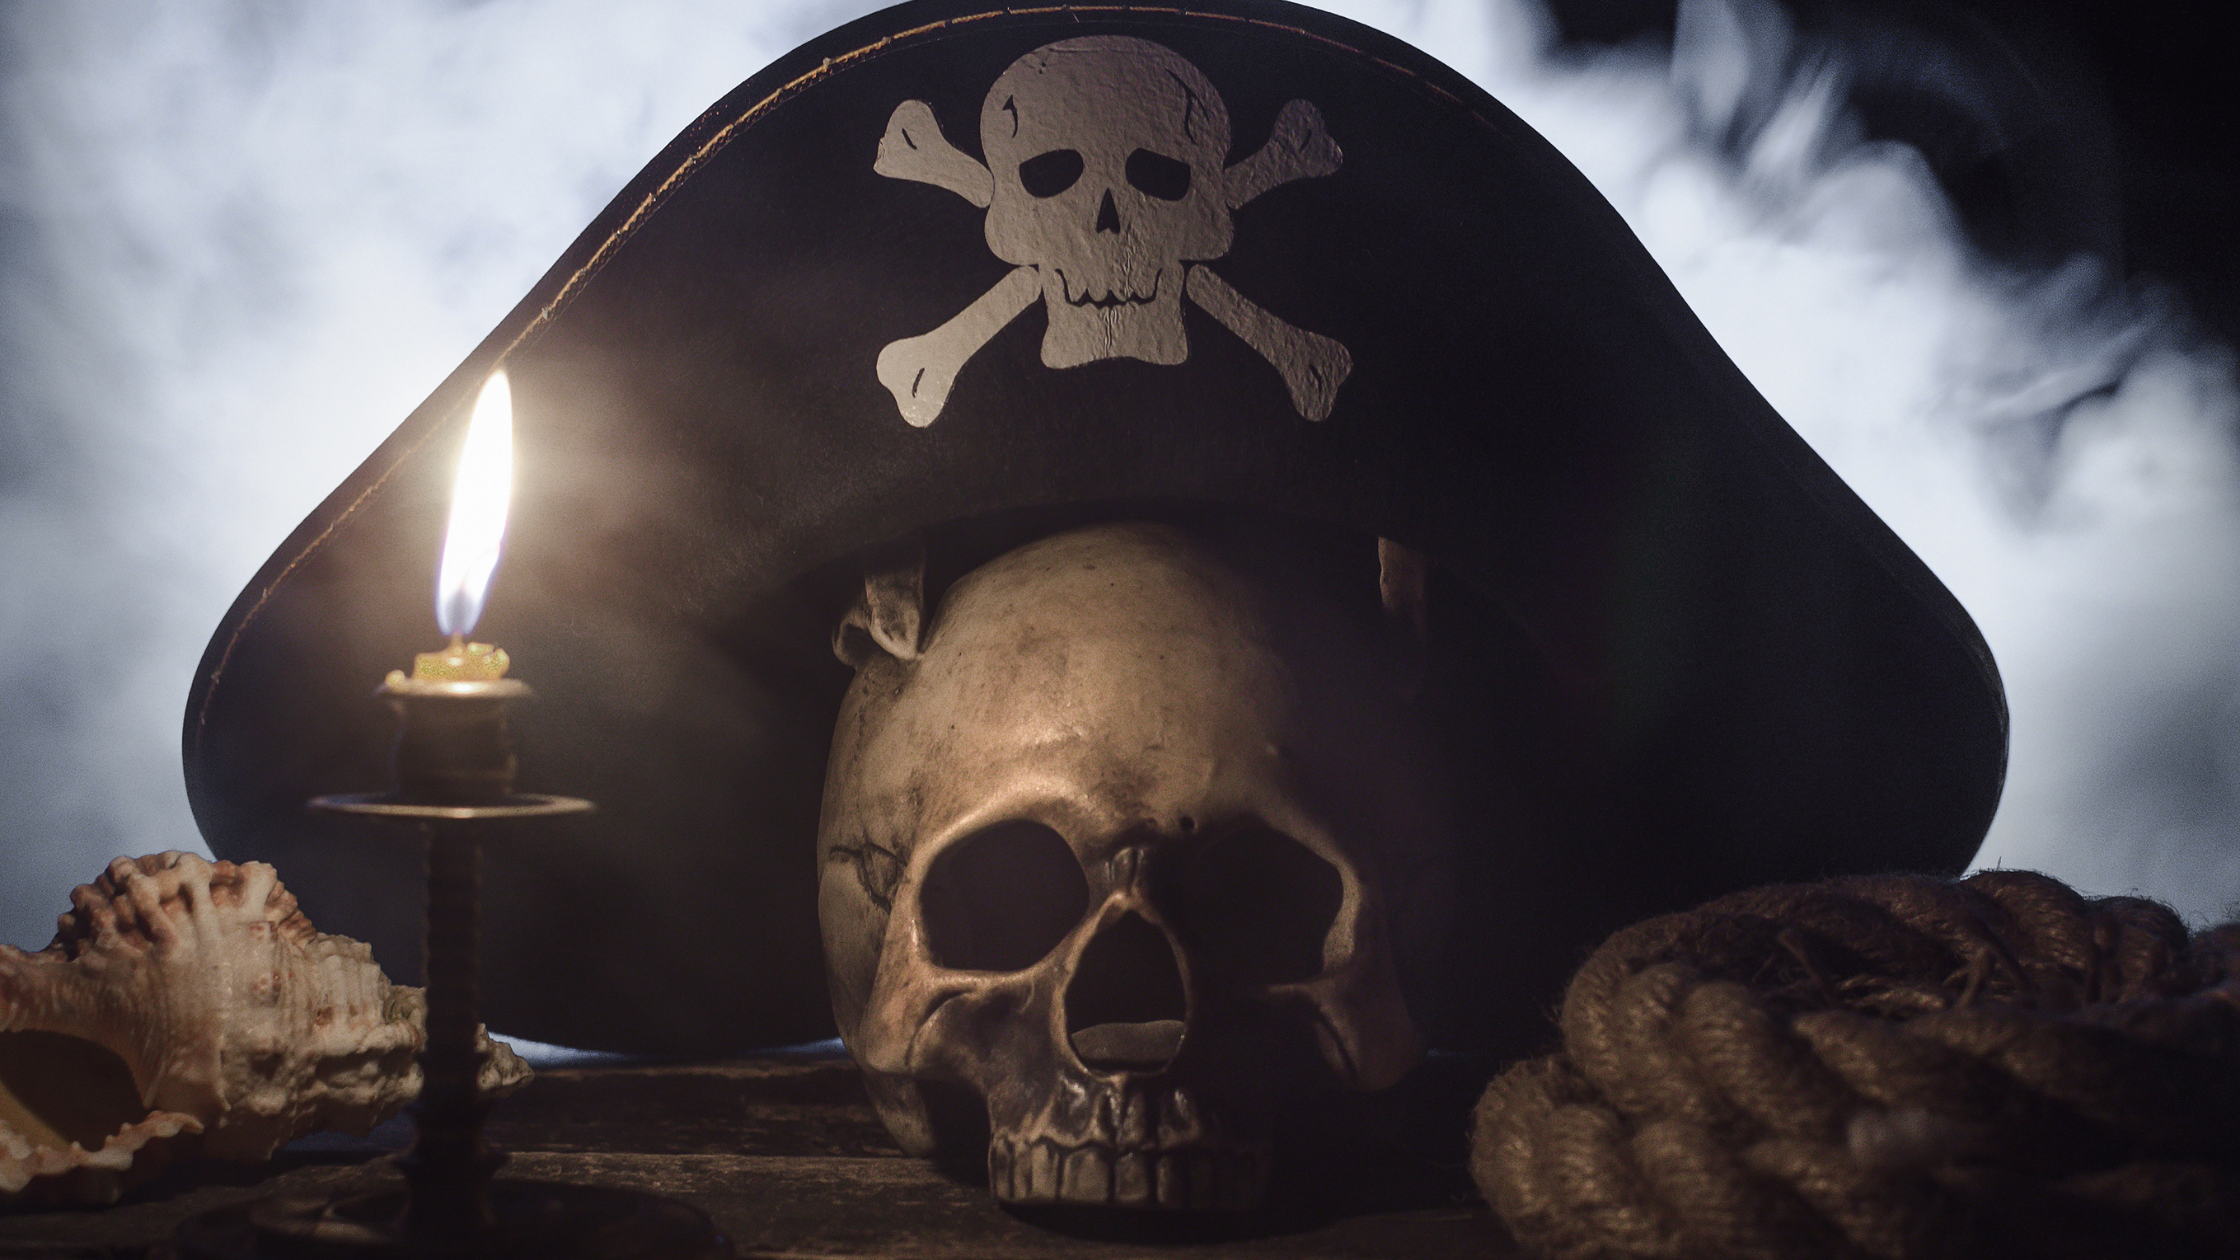 skull wearing pirate hat and candle